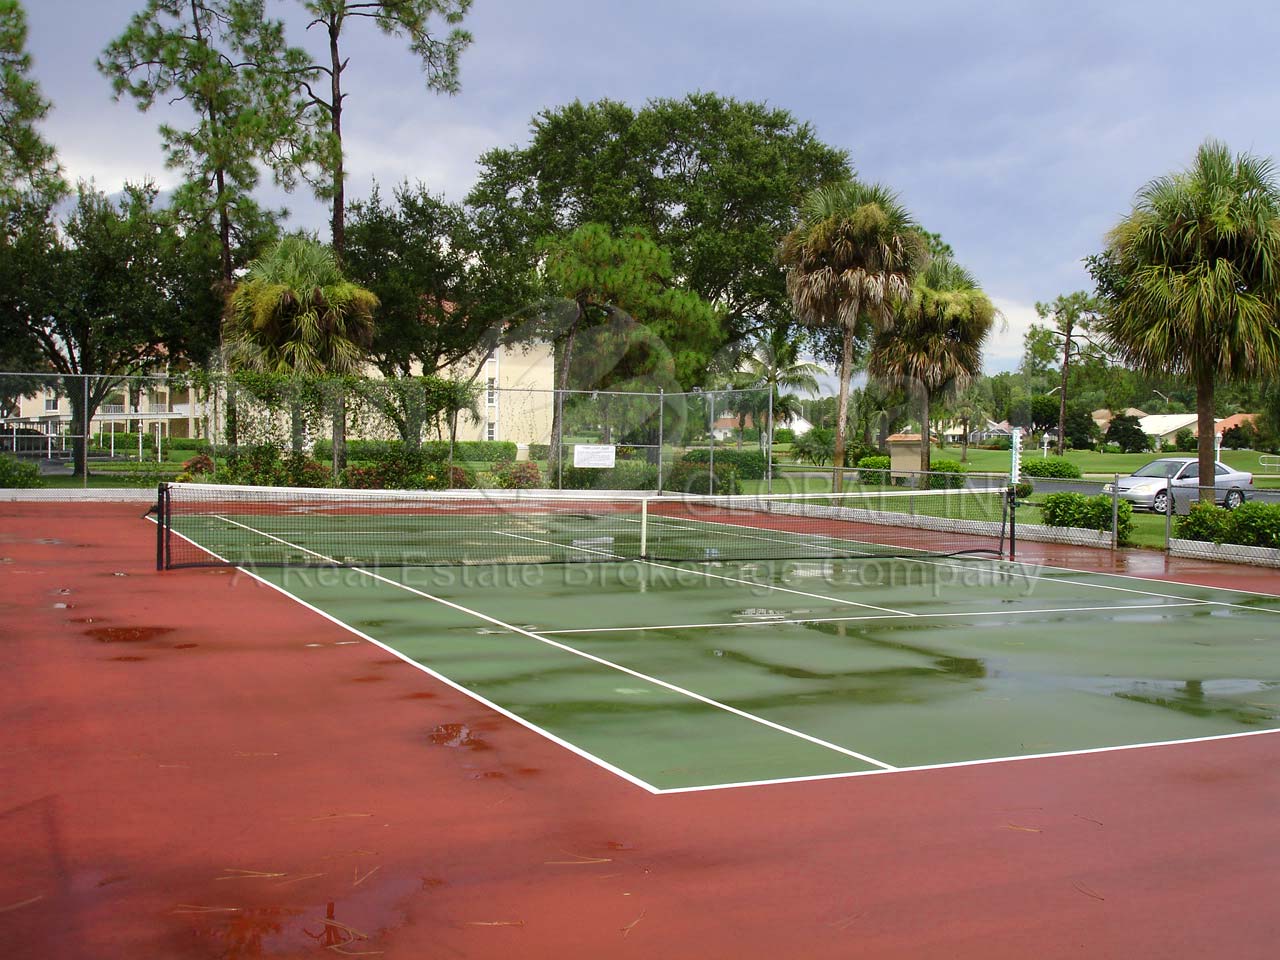 Amherst Cove tennis courts